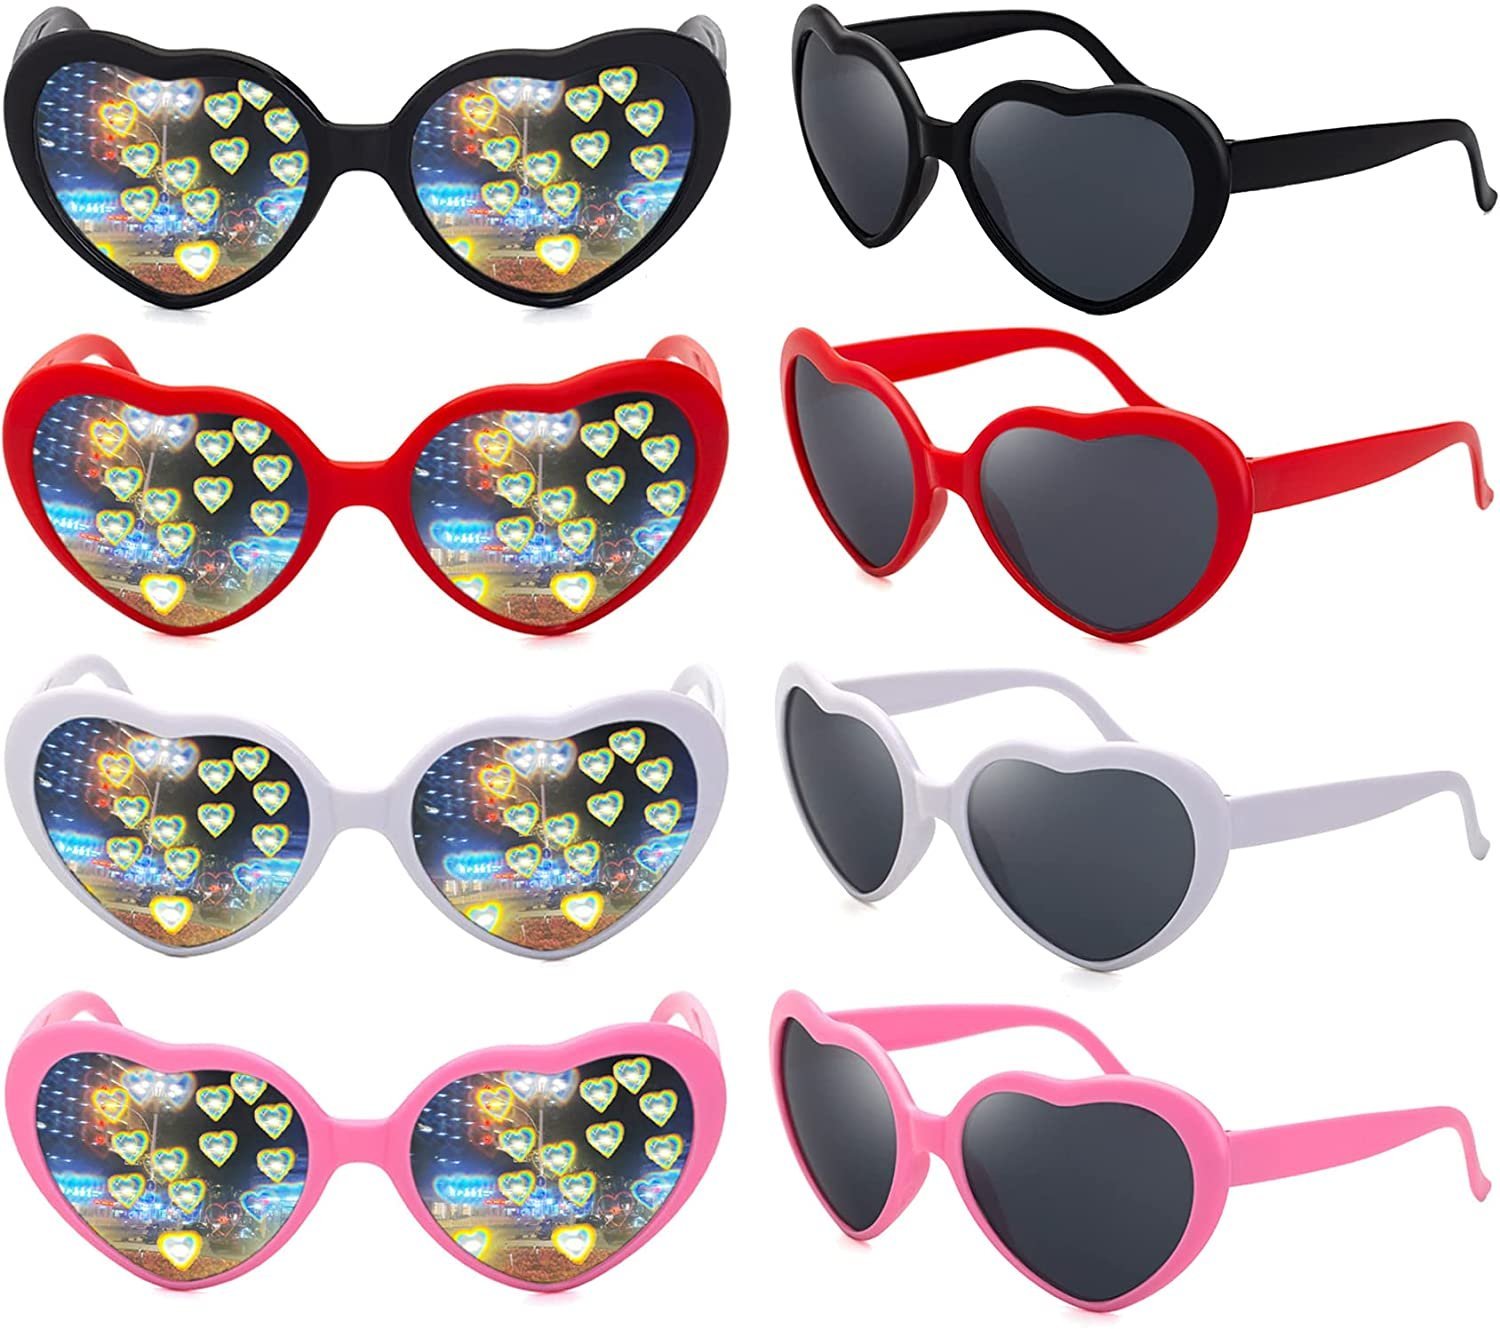 (🔥LAST DAY PROMOTION - SAVE 49% OFF)Heart-shaped lights become love special effects glasses-Buy 4 Get Extra 20% OFF